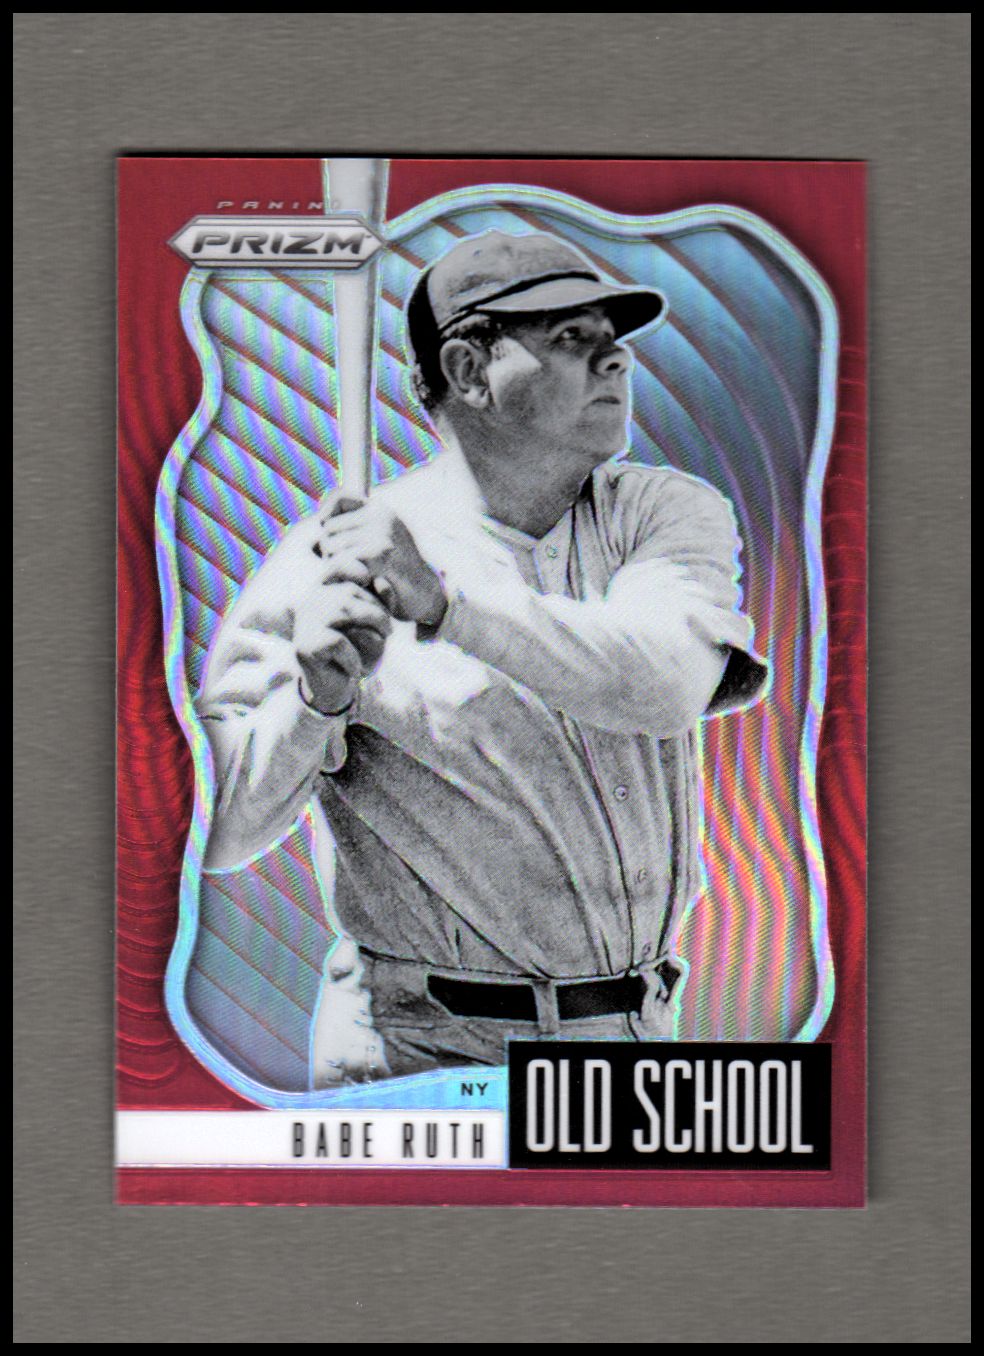 2021 Panini Prizm Old School Prizms Red #1 Babe Ruth